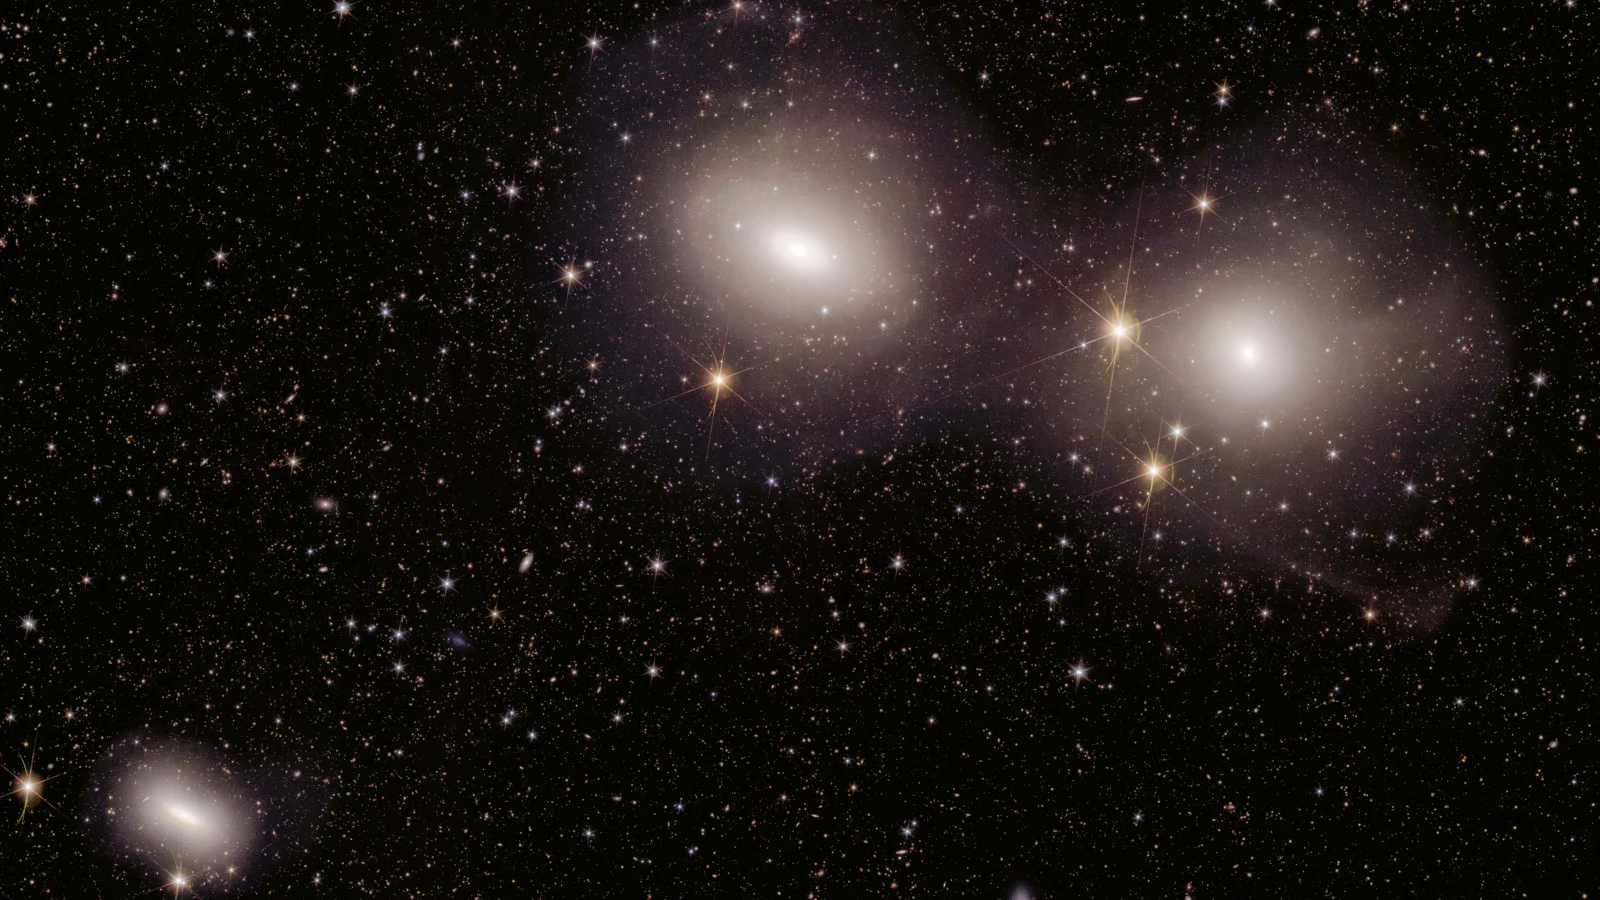 Euclid's new image of the Dorado group of galaxies crop